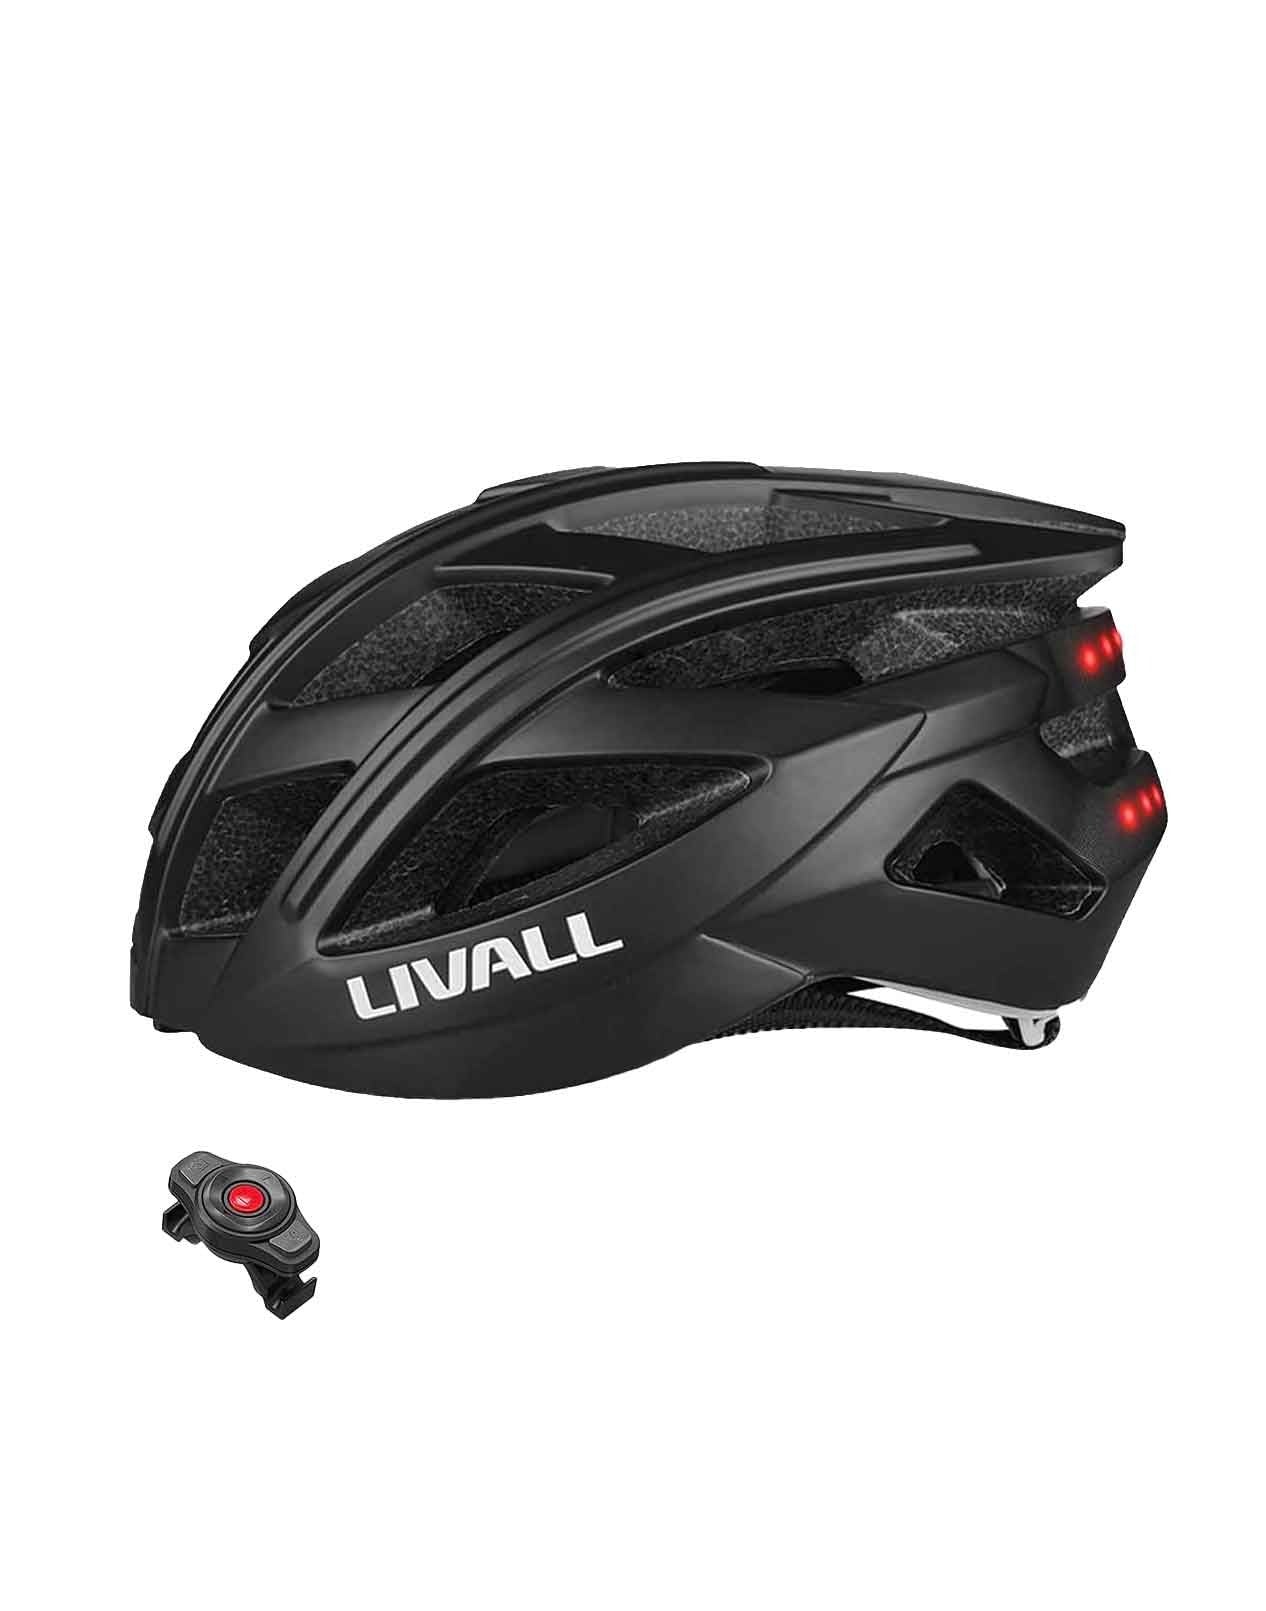 Livall LS1 E-Scooter *Free Smart Helmet* - Riding Scooters - Scooters - Electric Monkey NZ